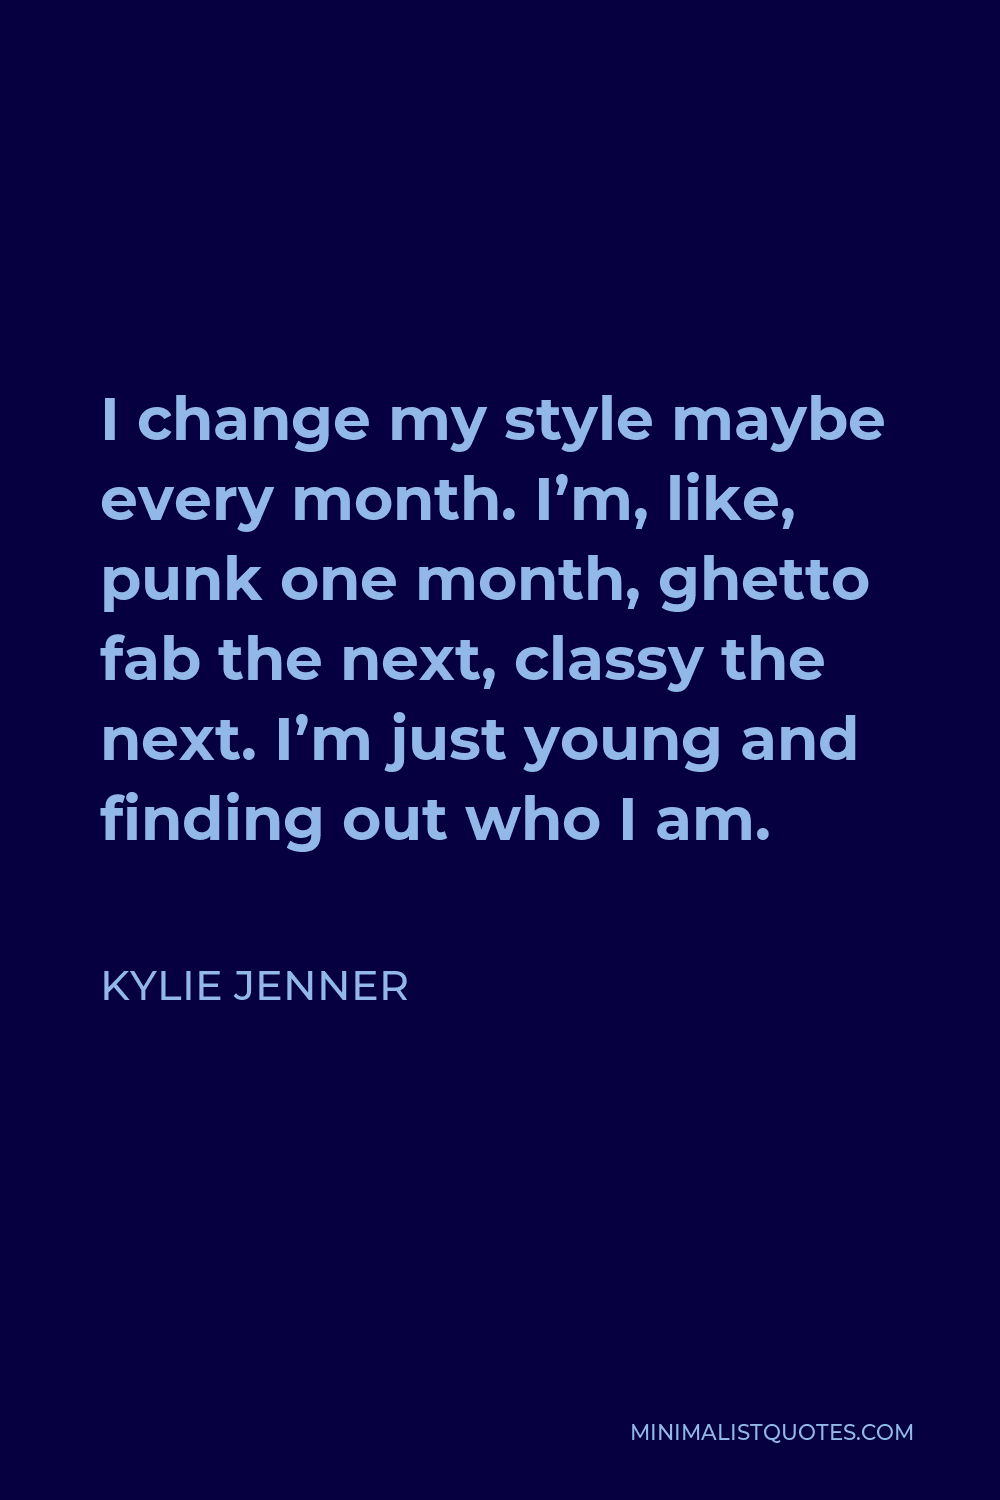 Kylie Jenner Quote - I change my style maybe every month. I’m, like, punk one month, ghetto fab the next, classy the next. I’m just young and finding out who I am.